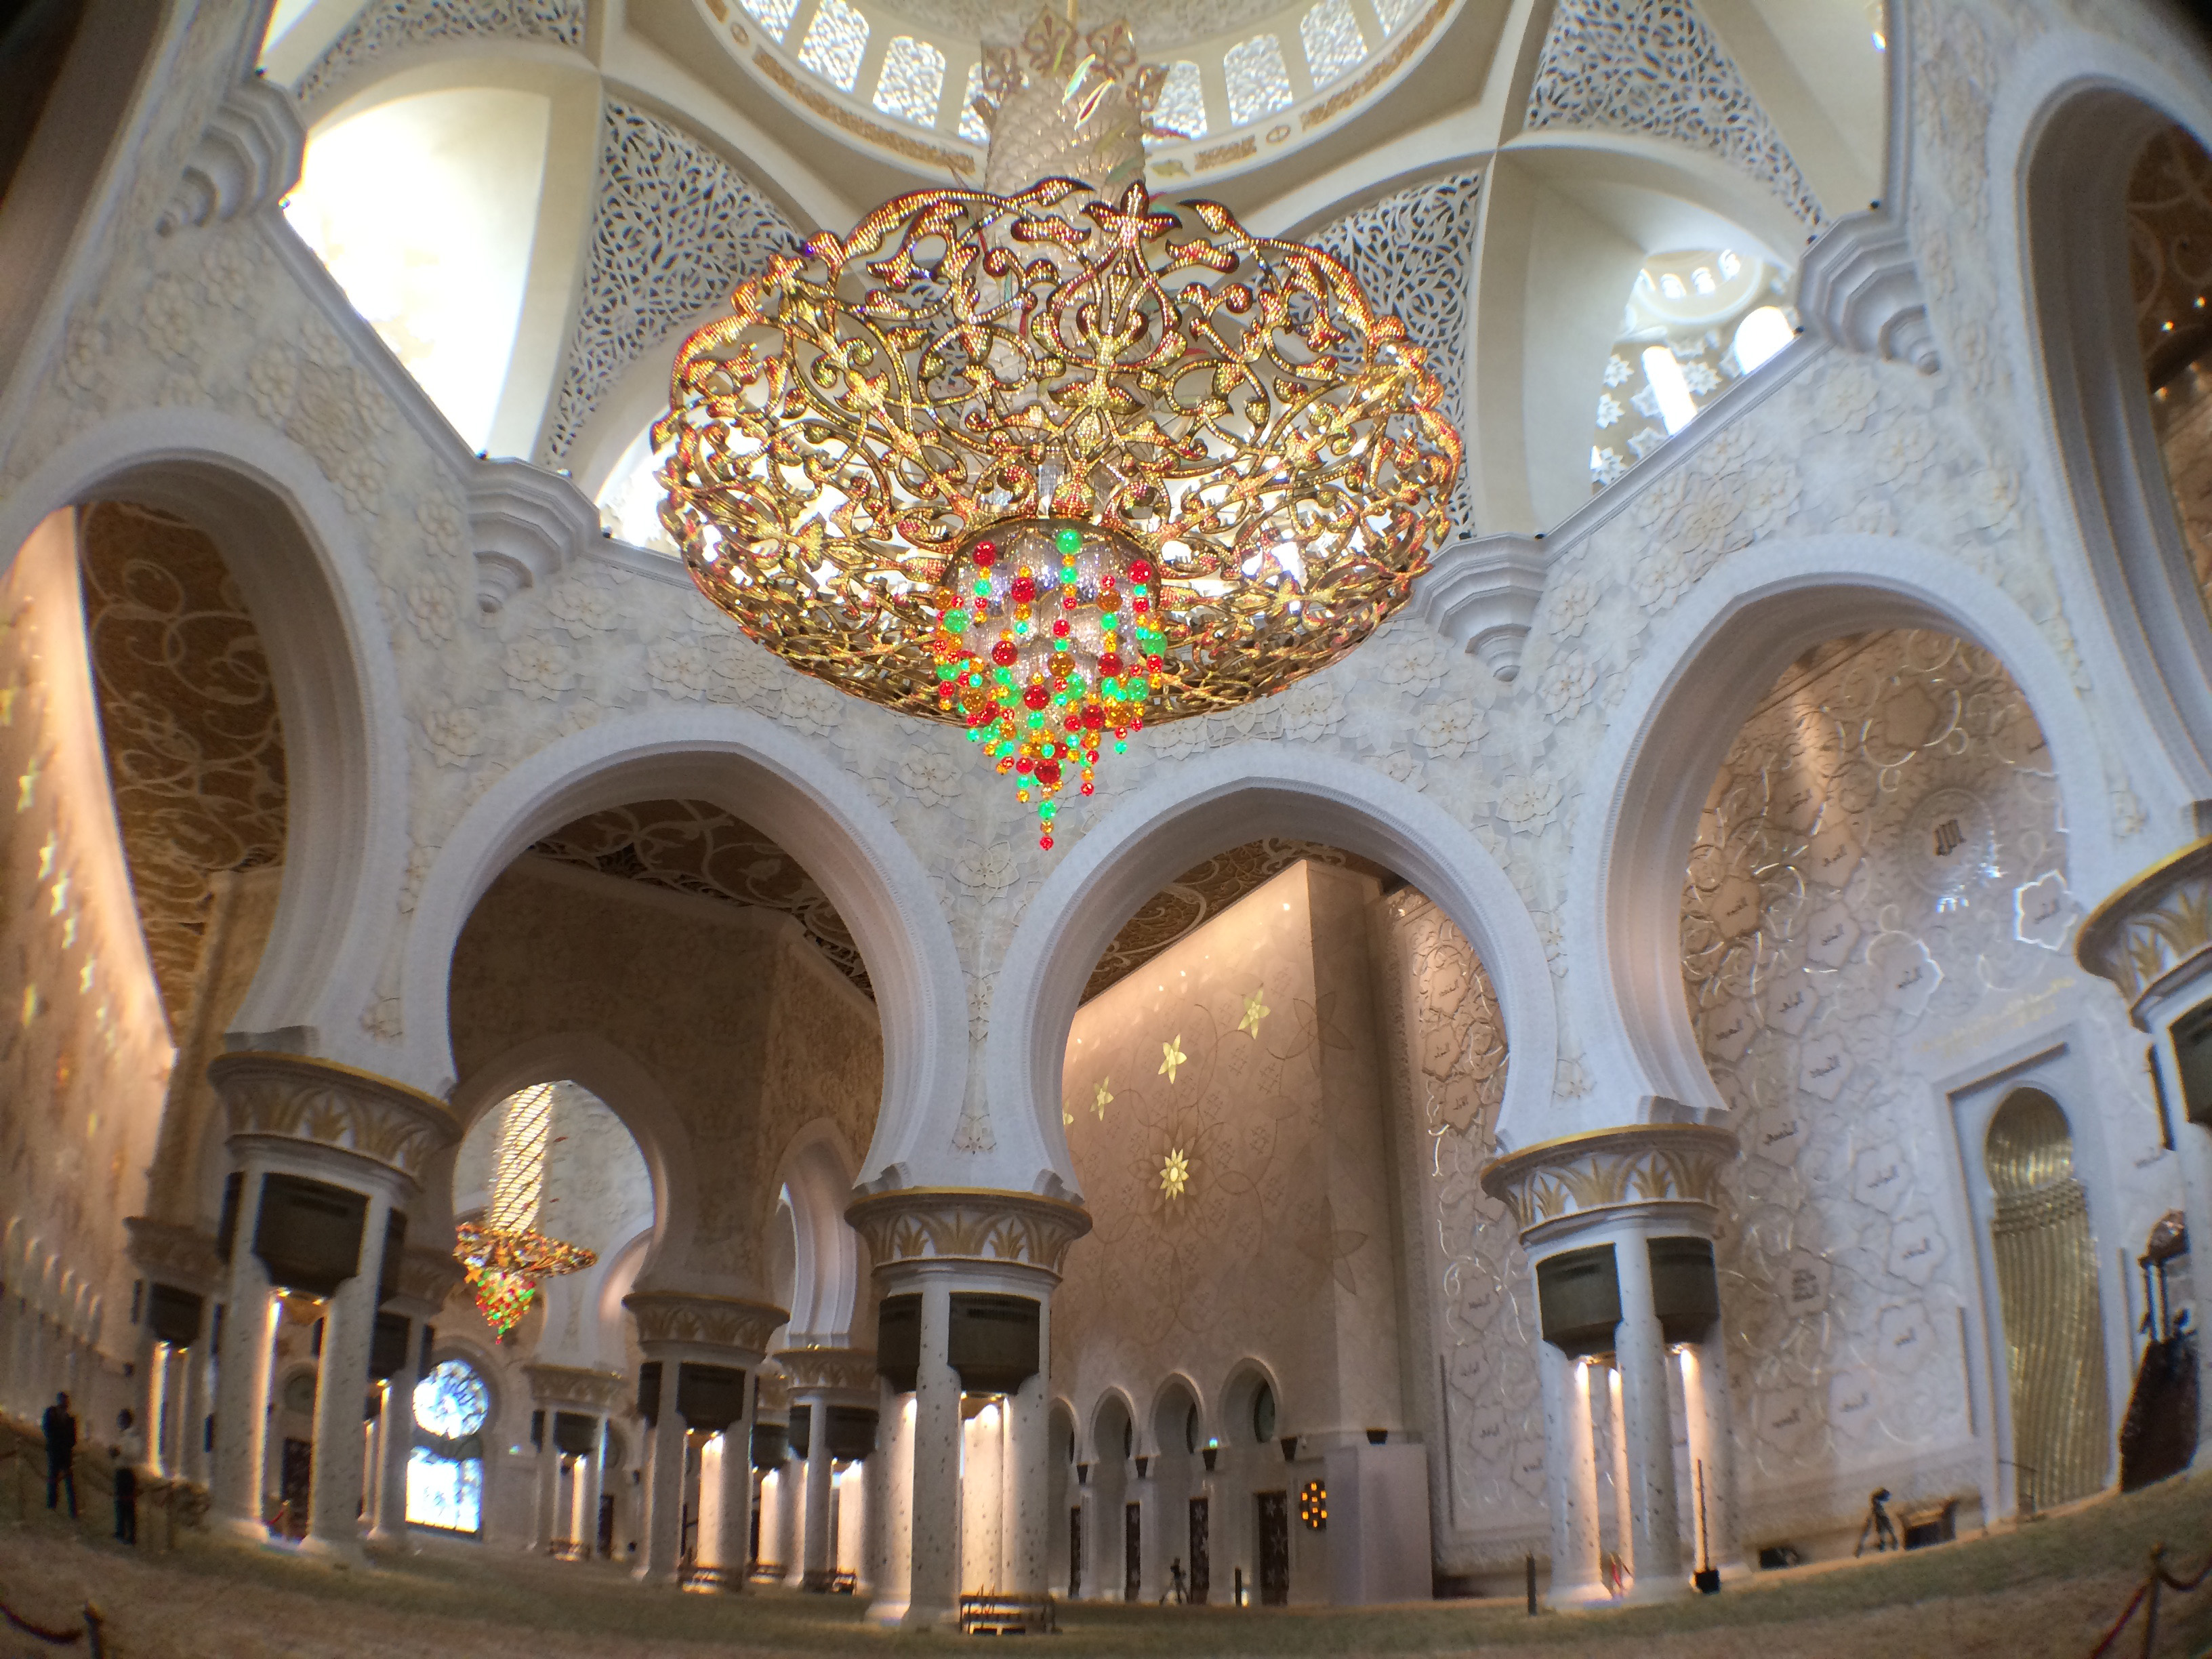 Abu Dhabi Highlights Sheikh Zayed Grand Mosque The World In A Weekend